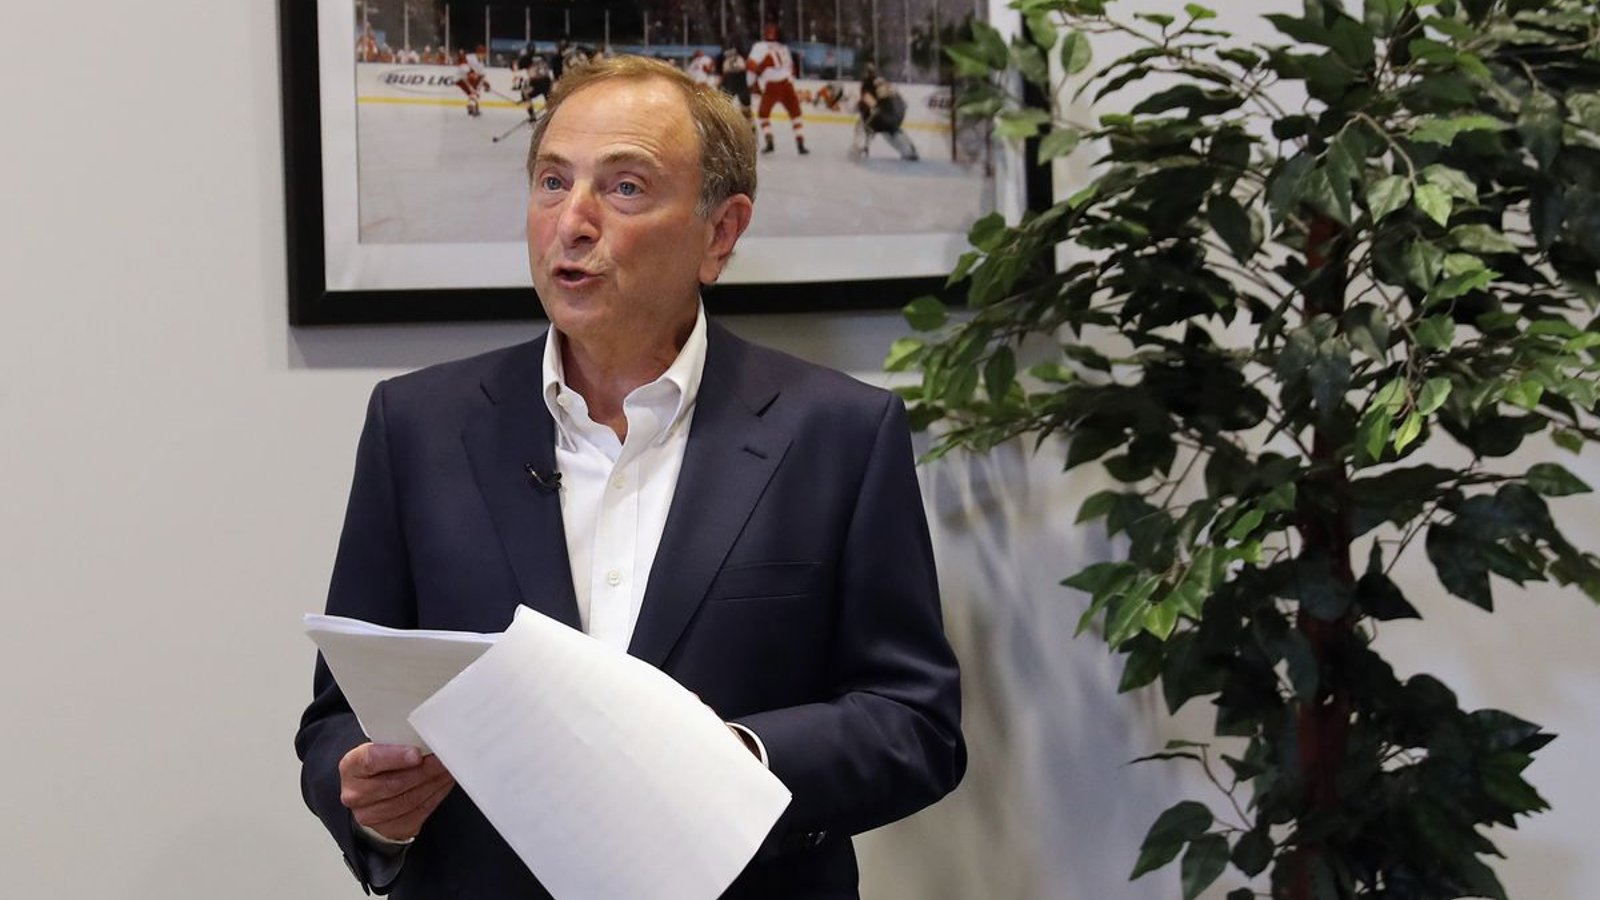 Two potential schedules presented to players for 2021 NHL season